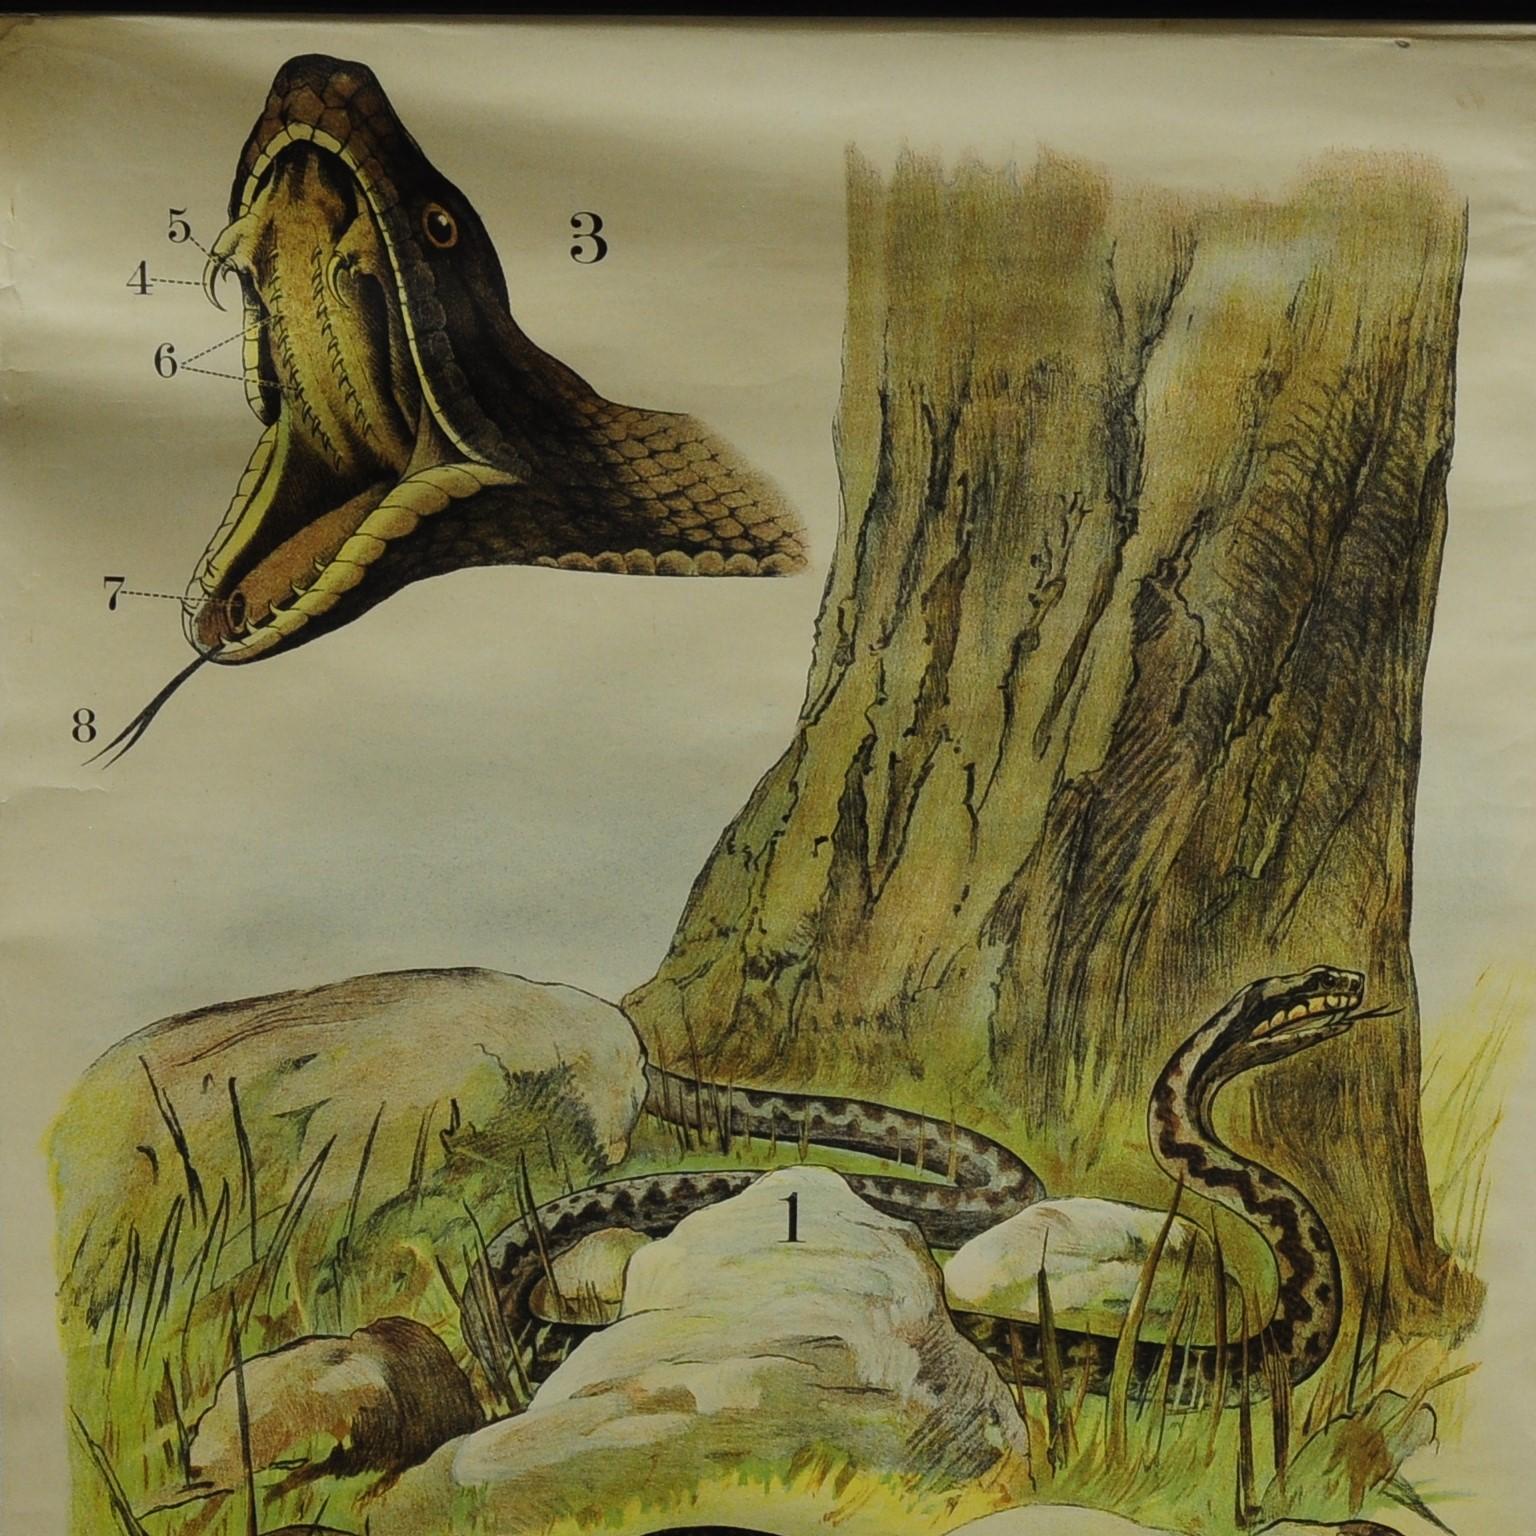 The wall chart shows the appearance of the adder and the grass snake. It was published by the Verlag von J.F. Schreiber, Esslingen and Munich. Colorful print on paper reinforced with canvas.
Measurements:
Width 108cm (42.52 inch)
Height 78 cm (30.71